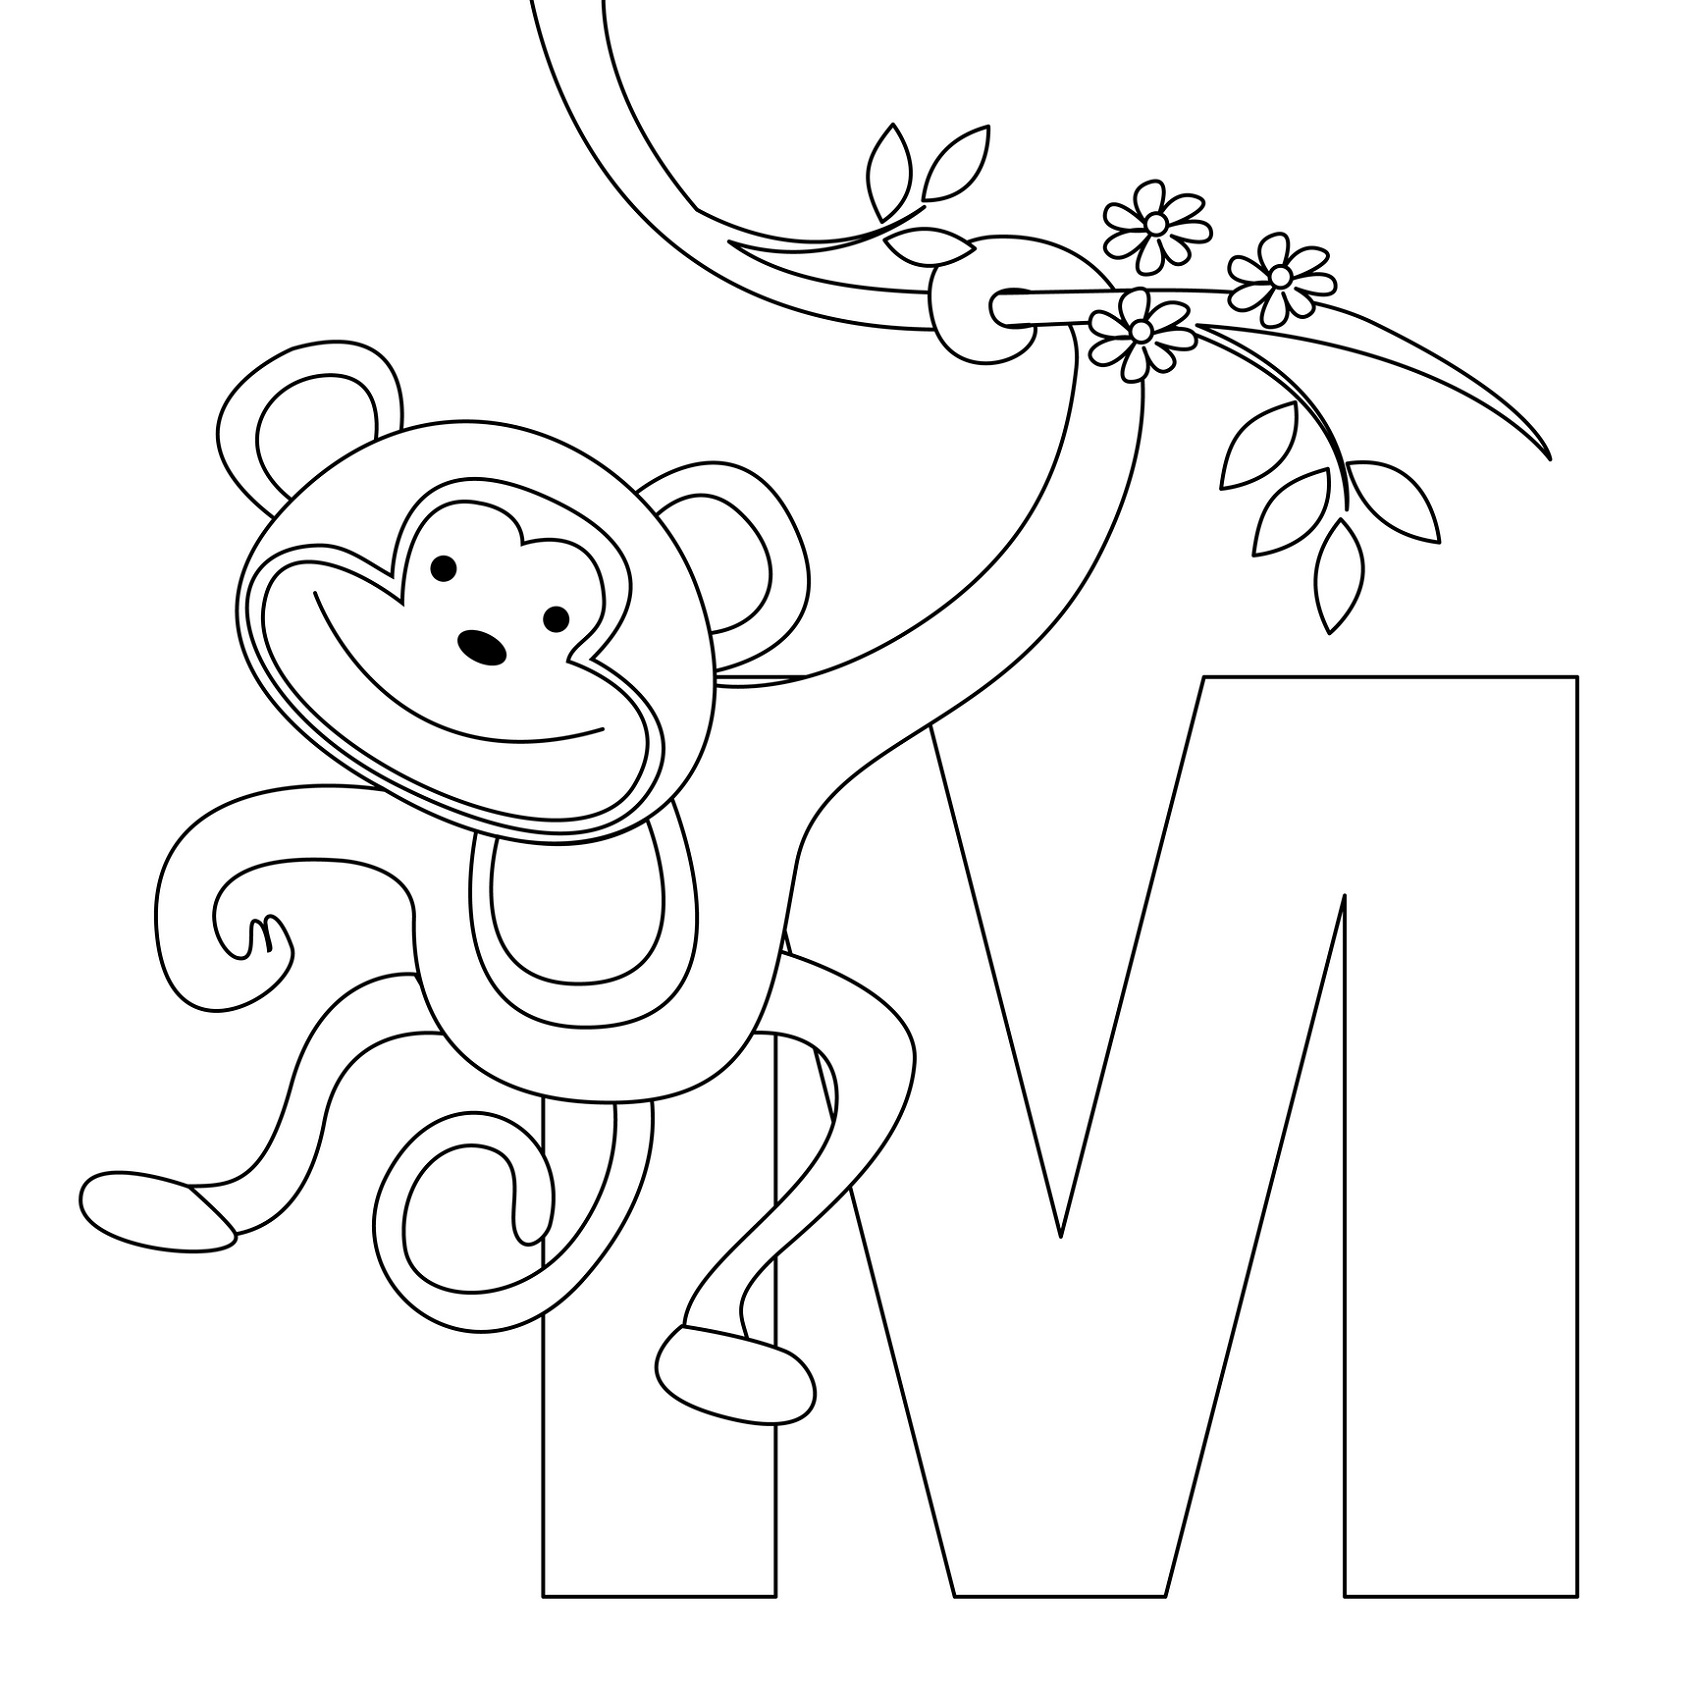 Alphabet Coloring Pages Toddlers